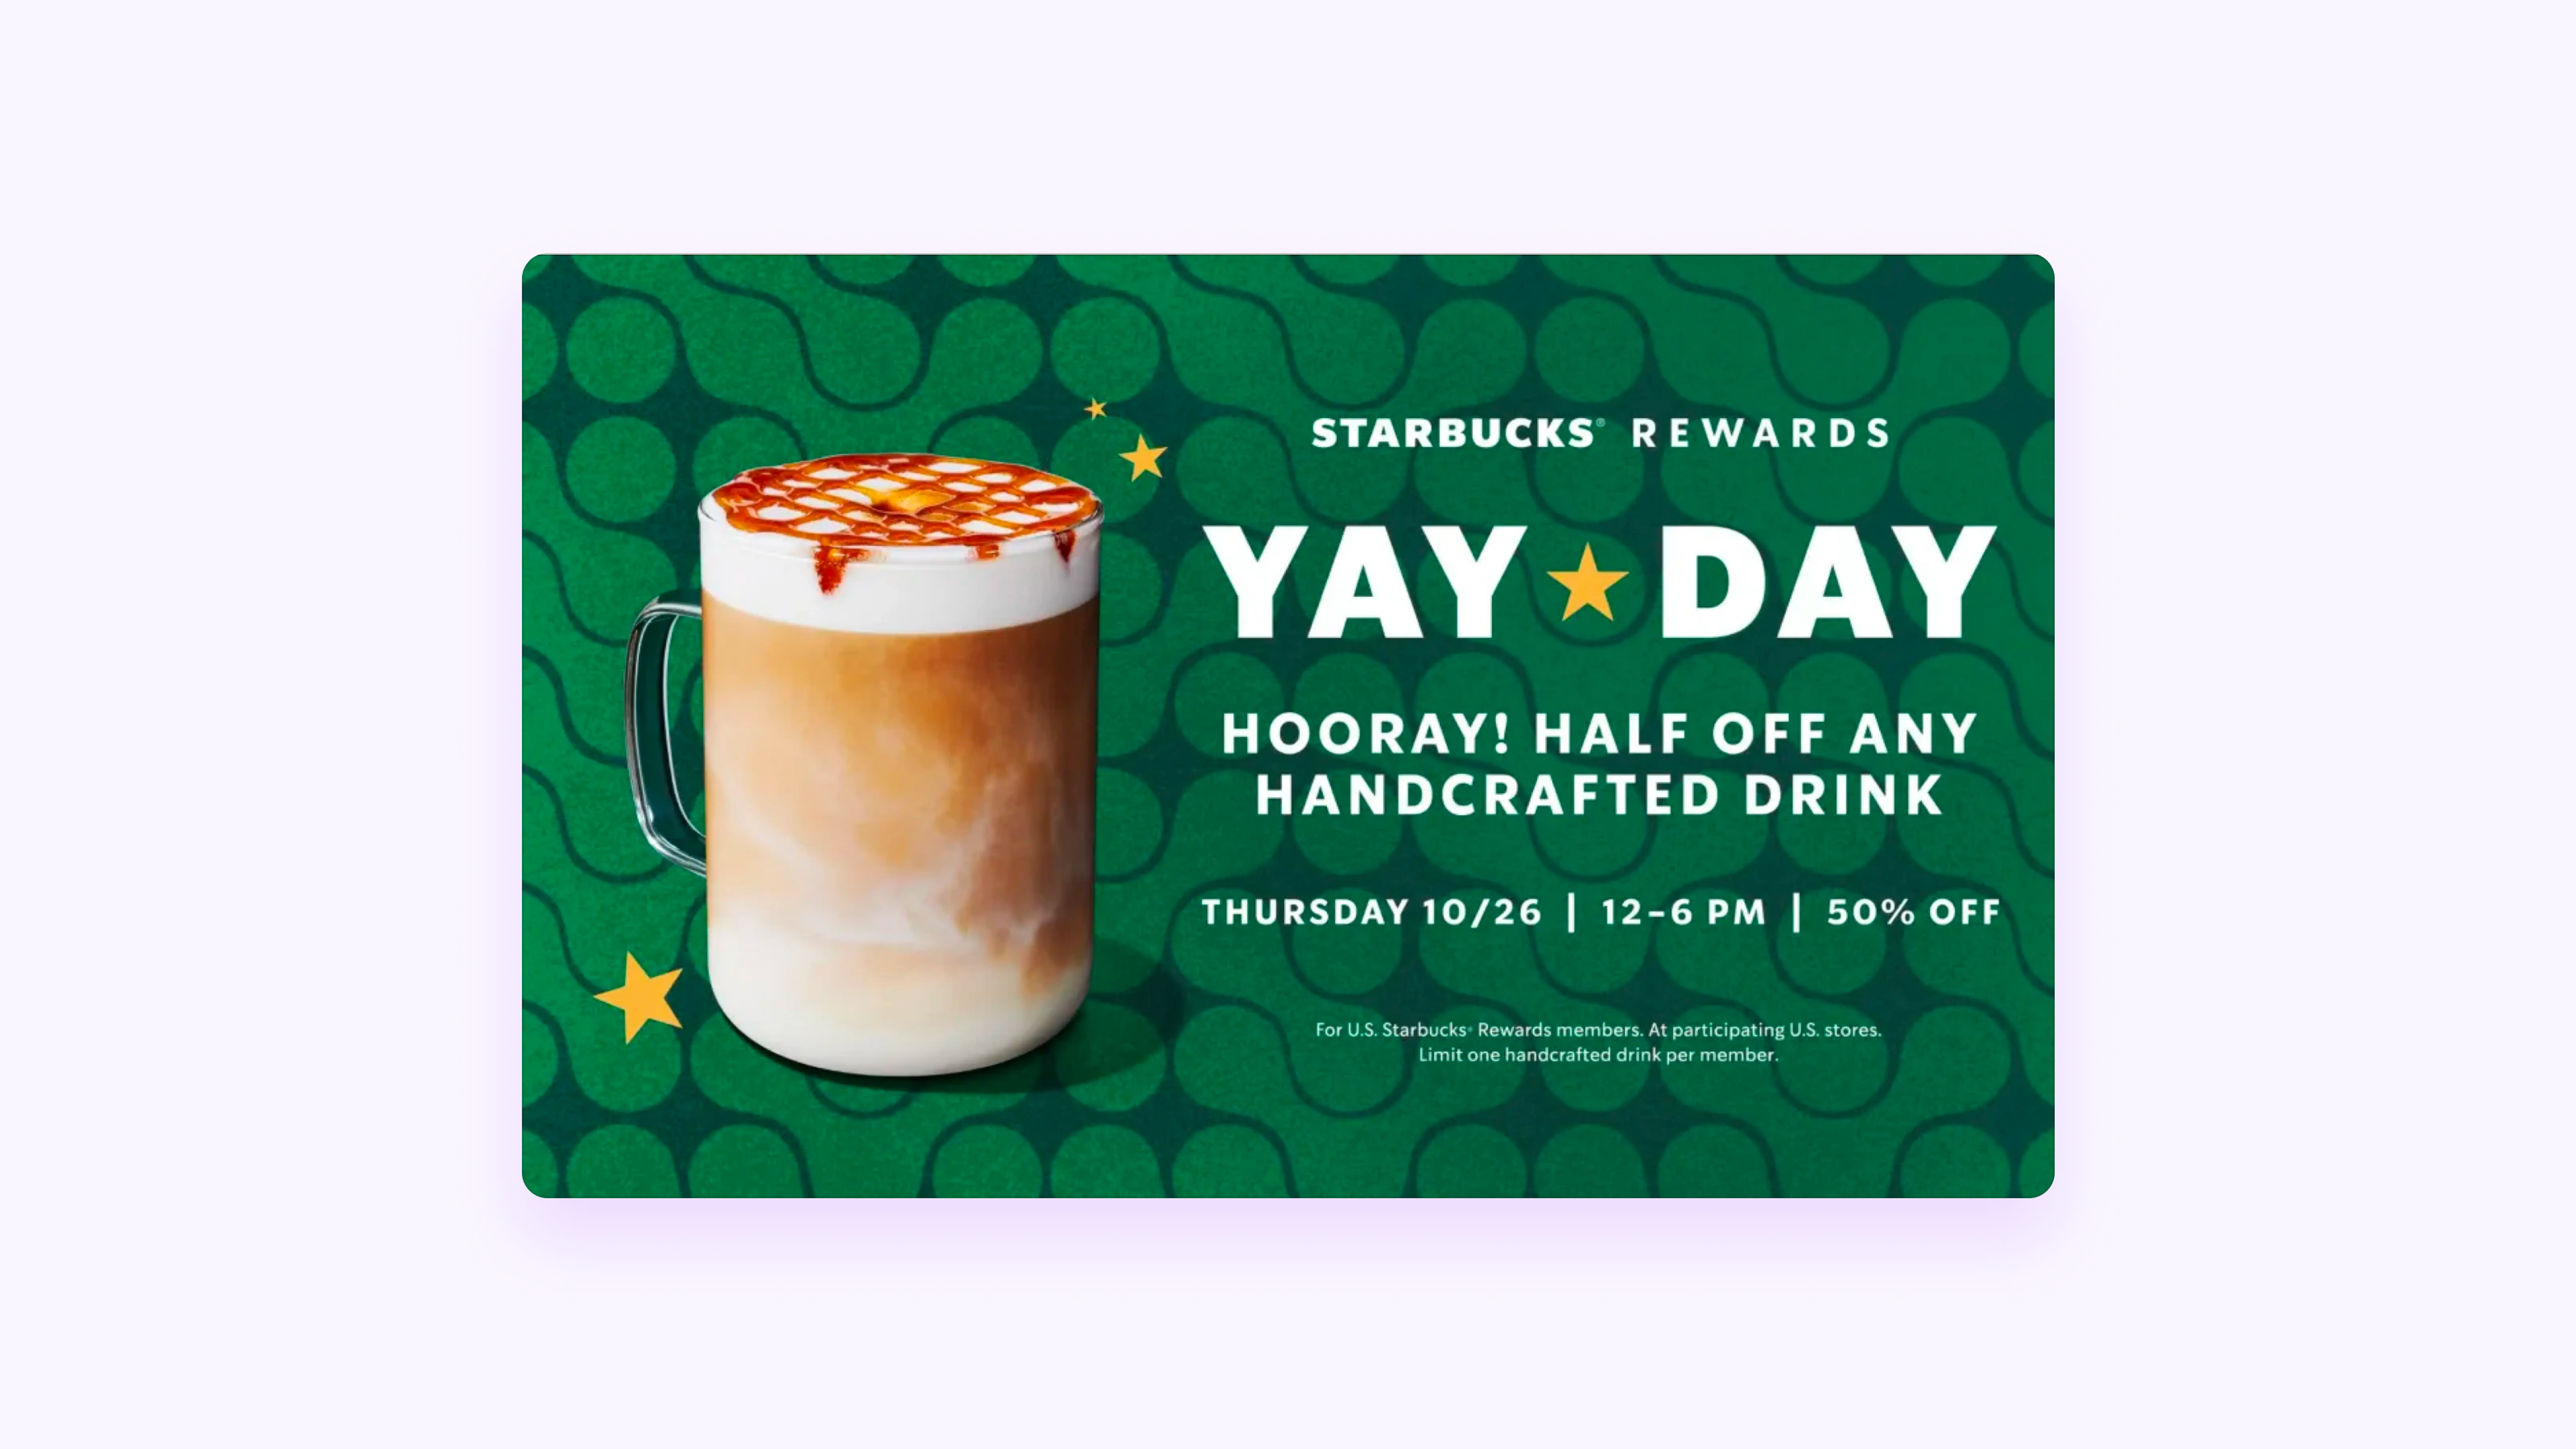 Image depicts a daily deal from Starbucks. Offer is for half-off any handcrafted drink during 12-6 PM on October 26.